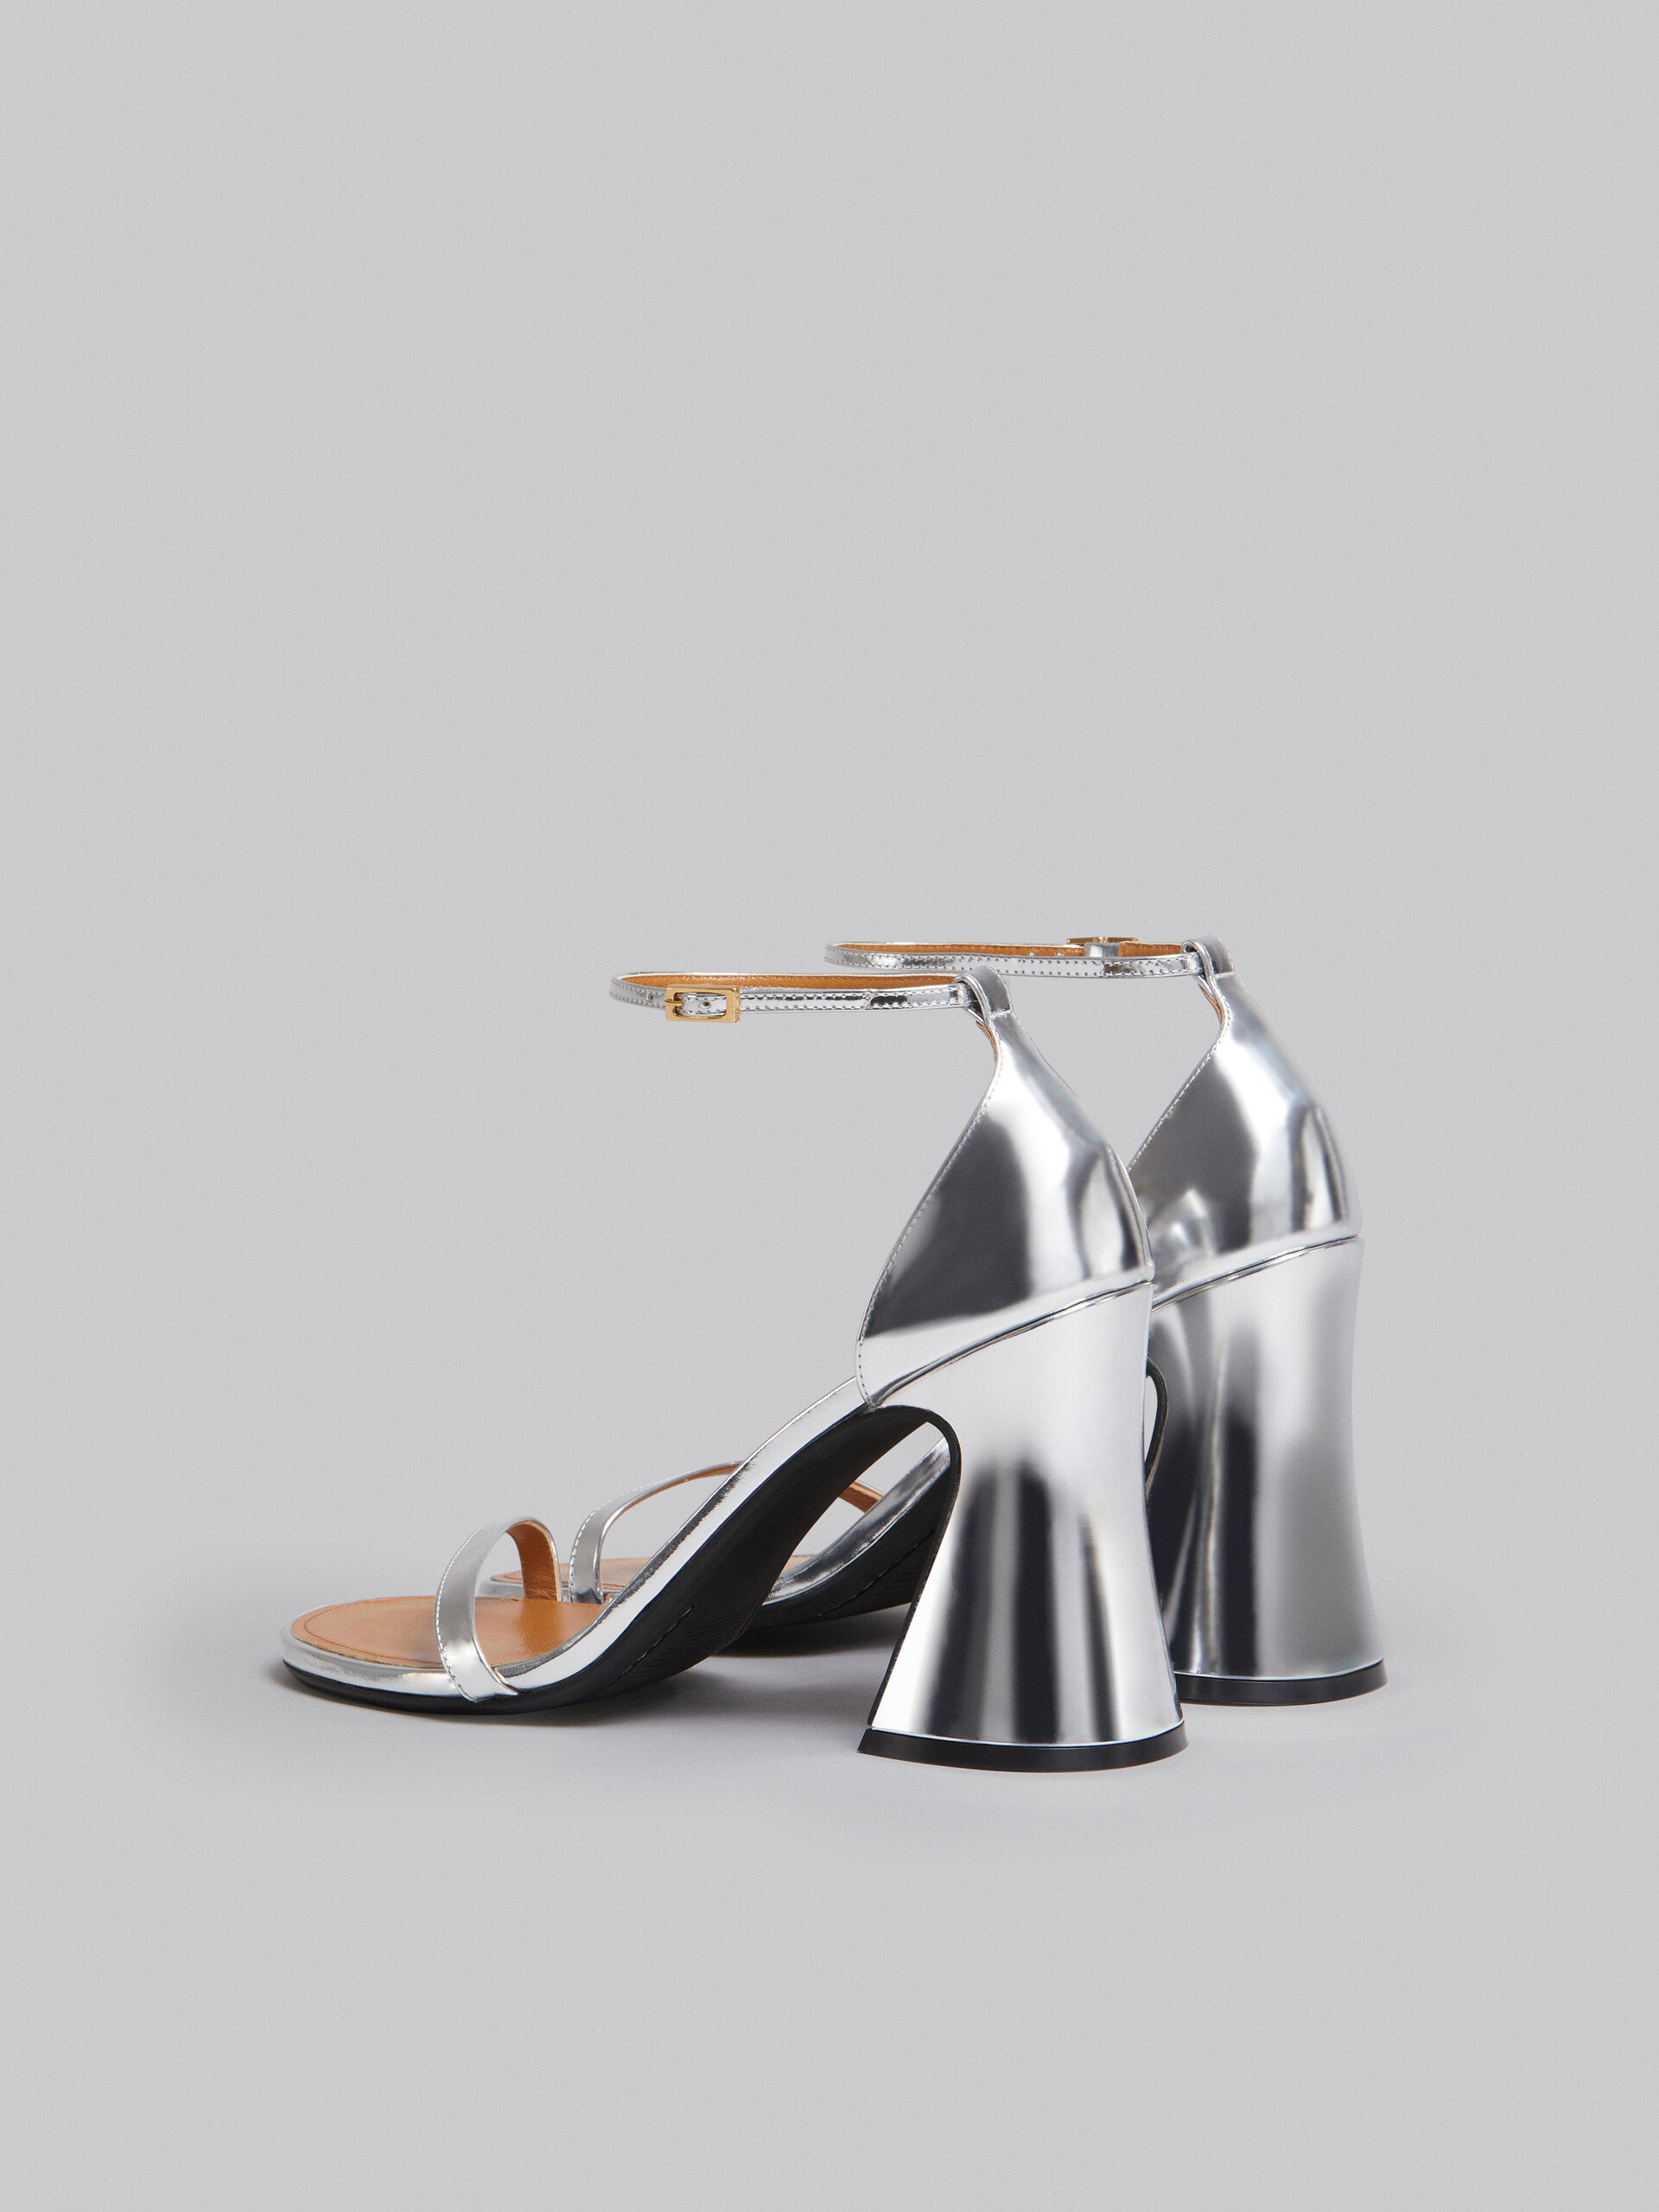 Silver mirrored leather sandal - Sandals - Image 3